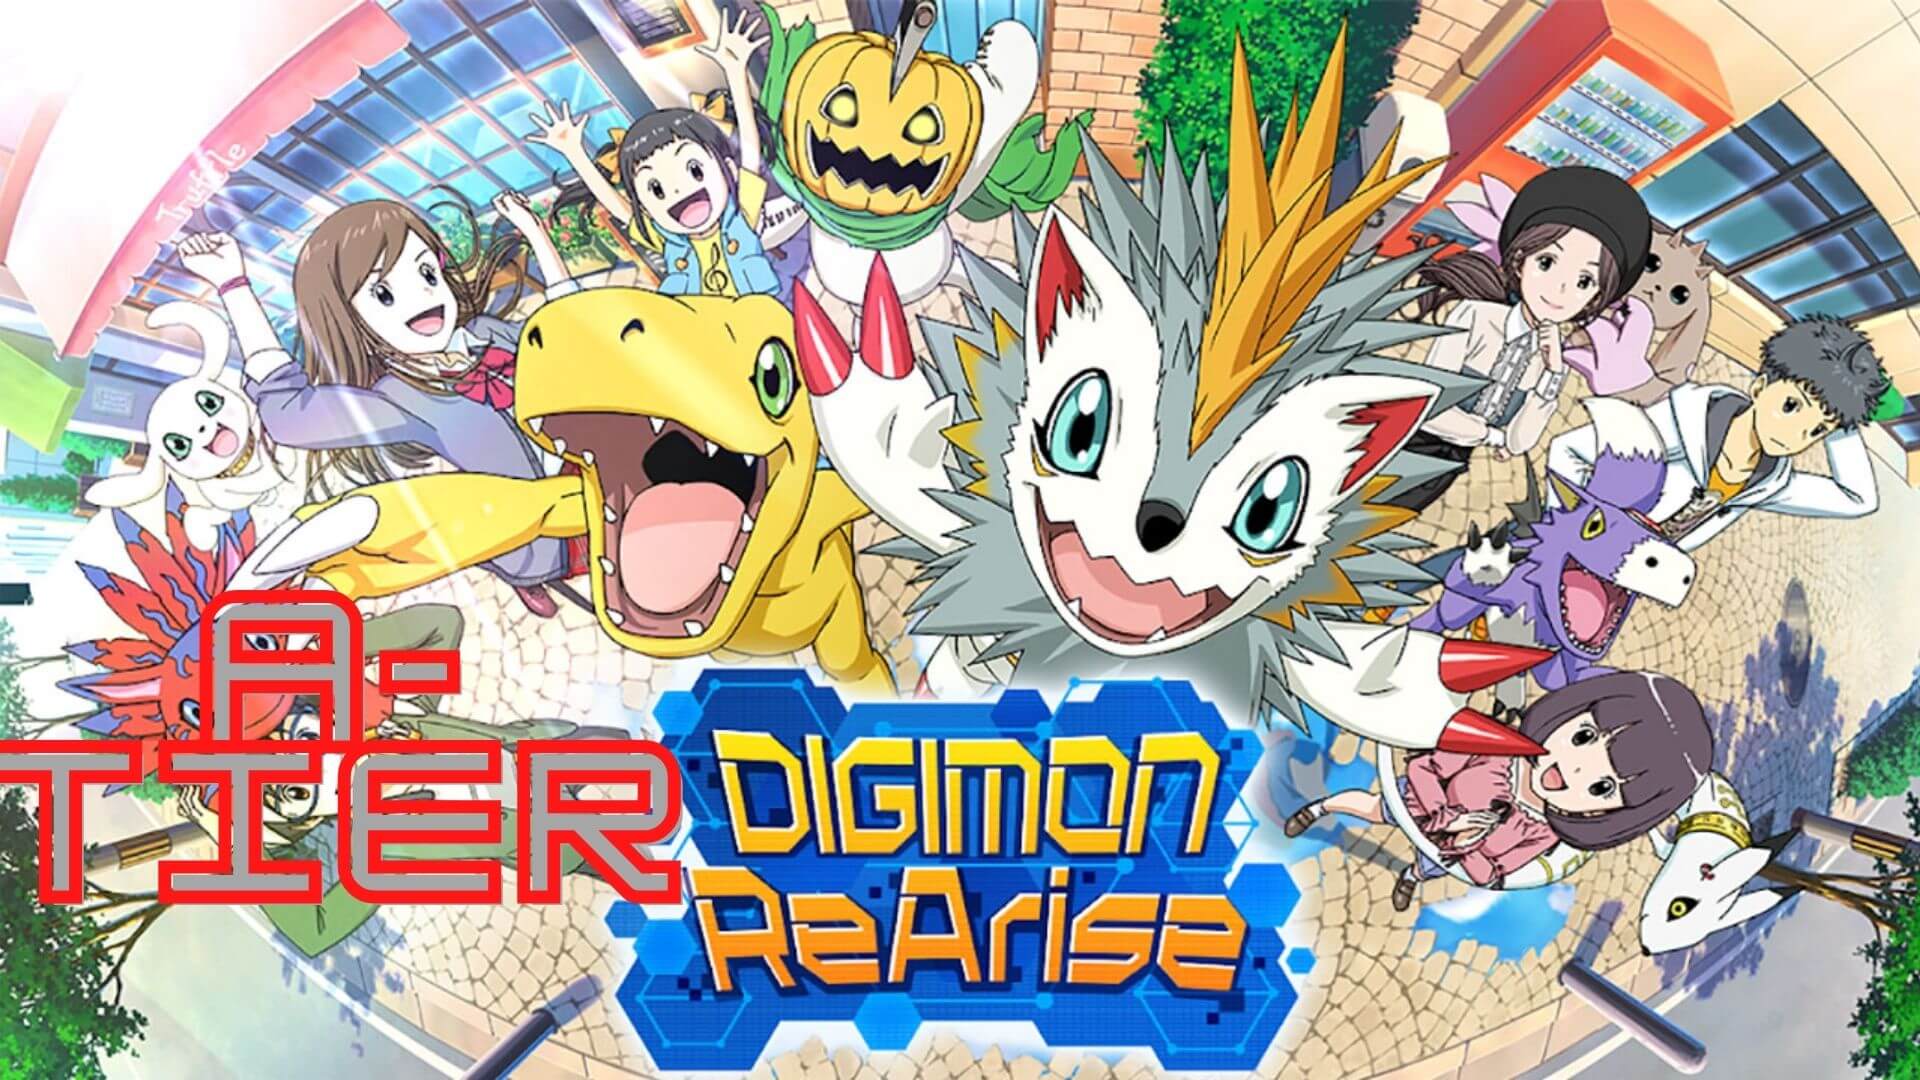 the second best tier in Digimon rearise